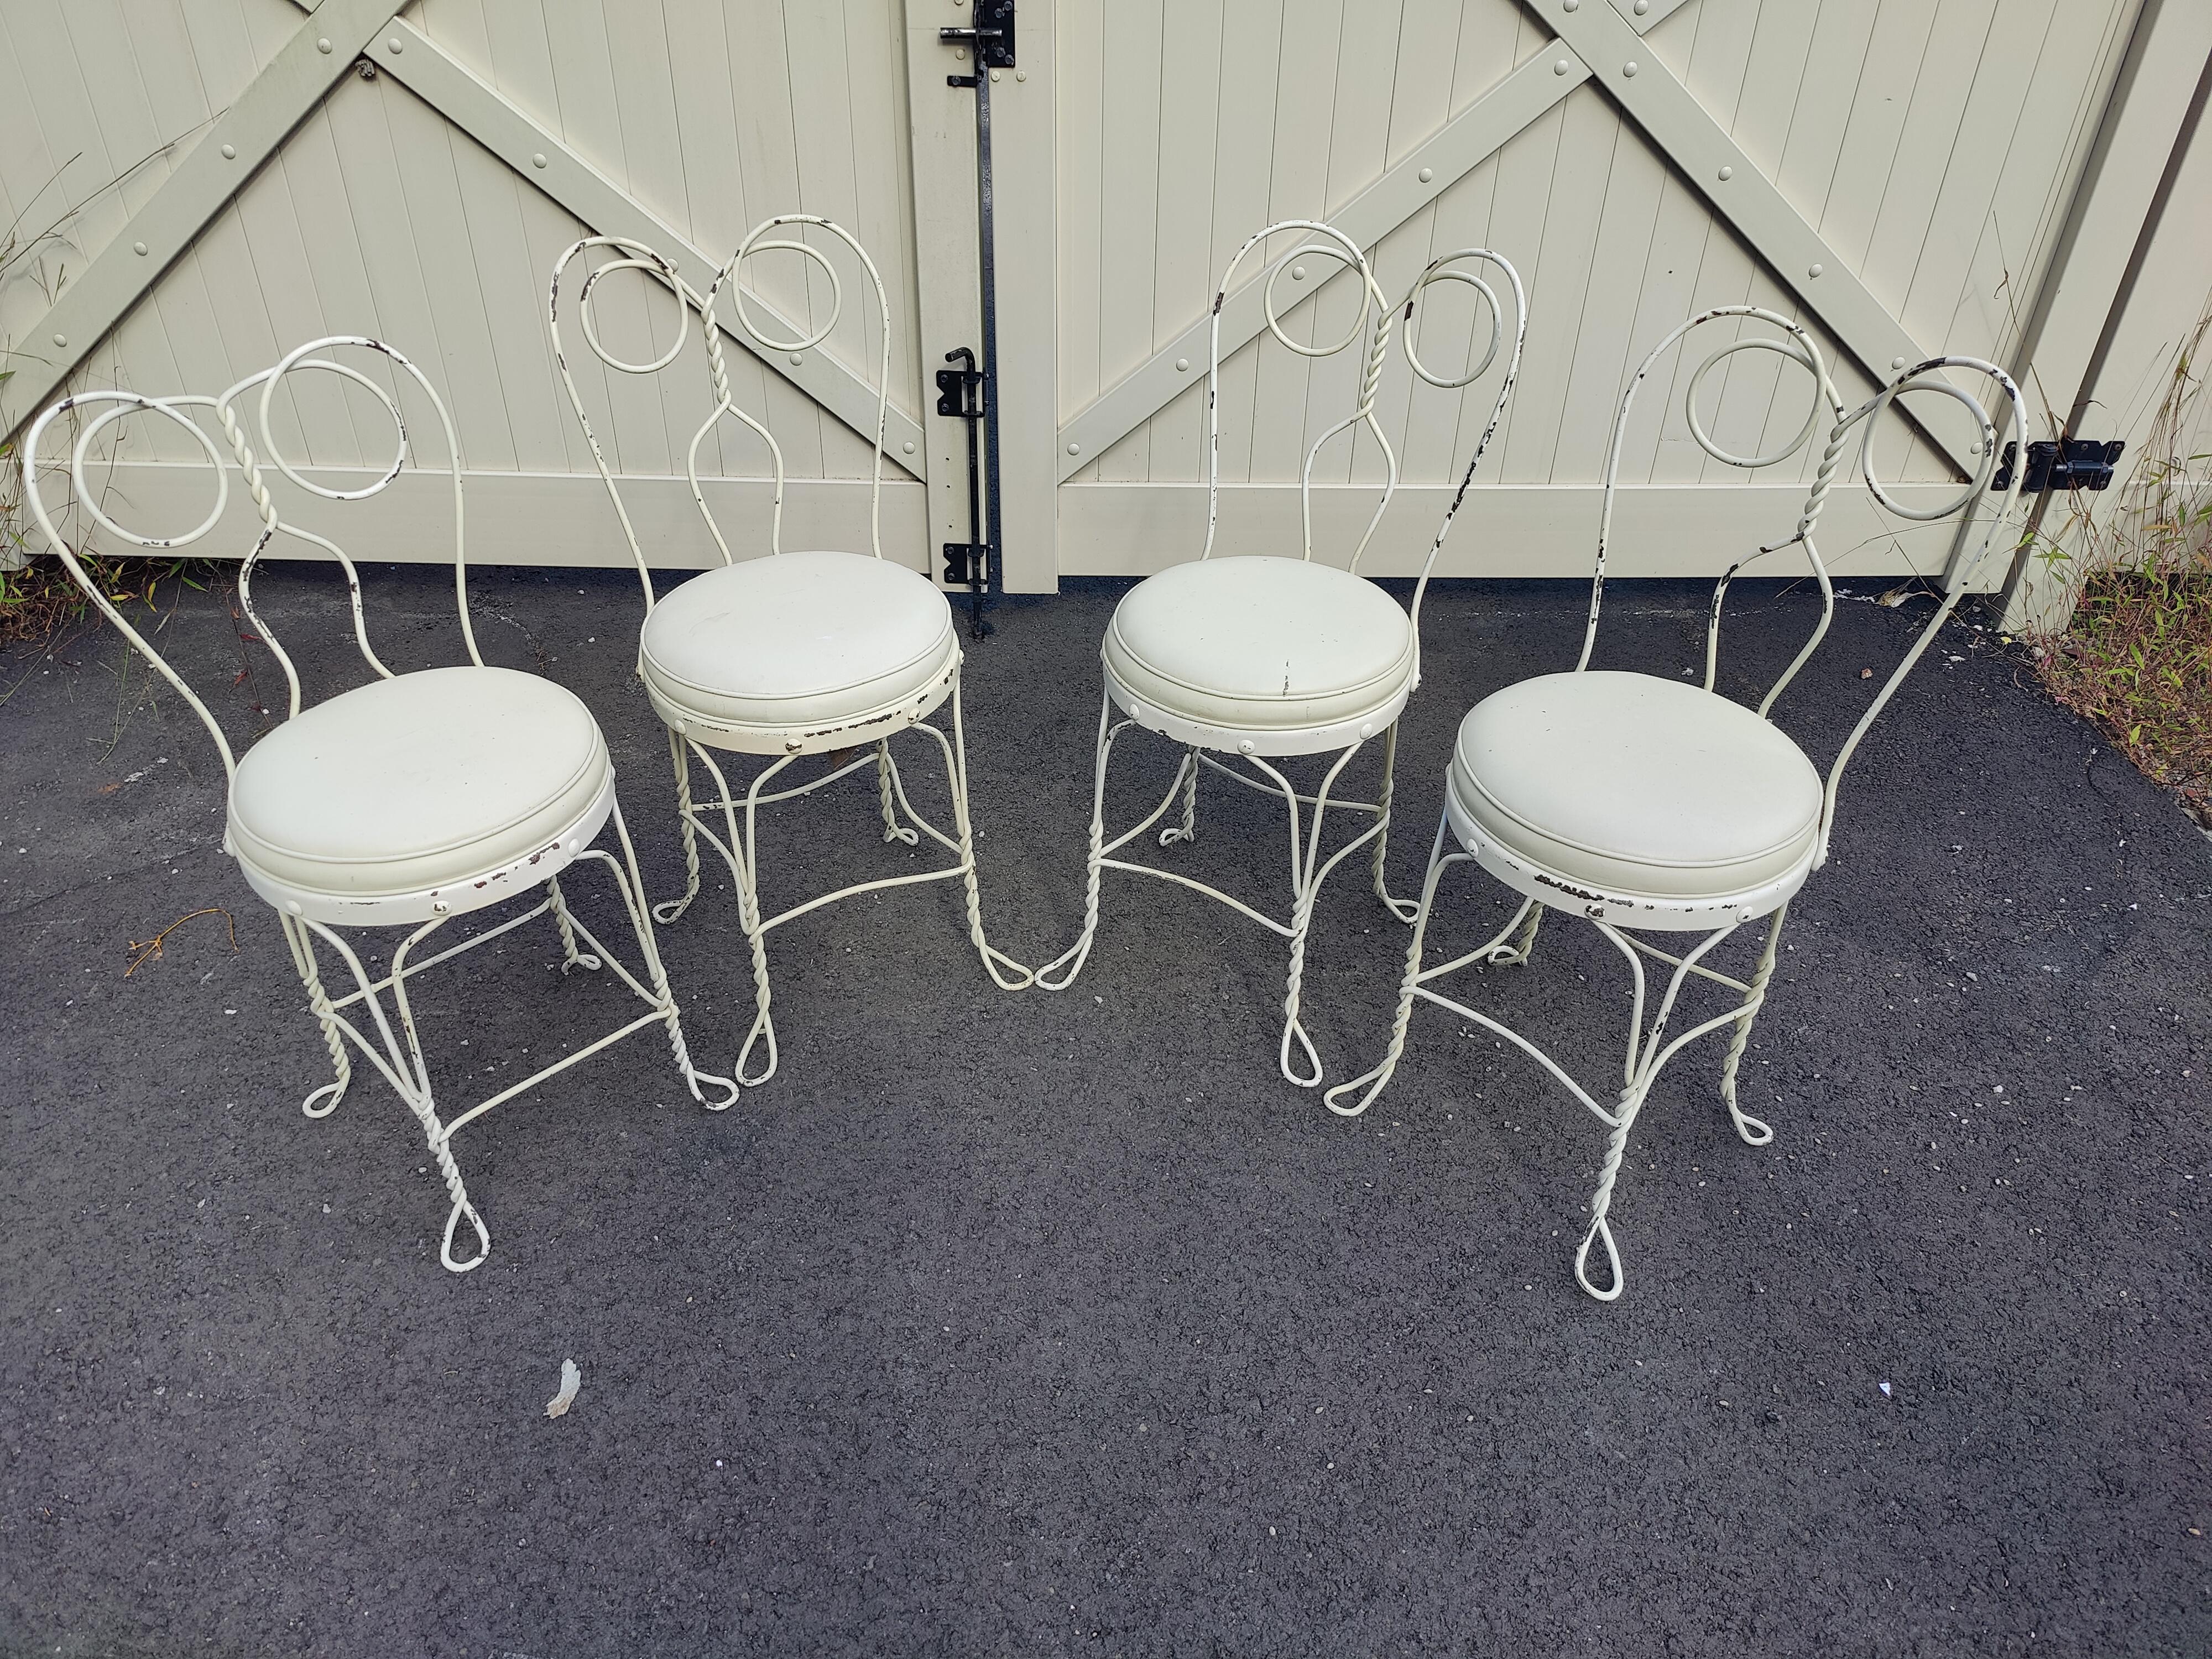 Set of ( 4 ) vintage wrought iron ice cream chairs. Featuring twisted metal legs, back and white upholstered seats.

(Please confirm item location - NY or NJ - with dealer).